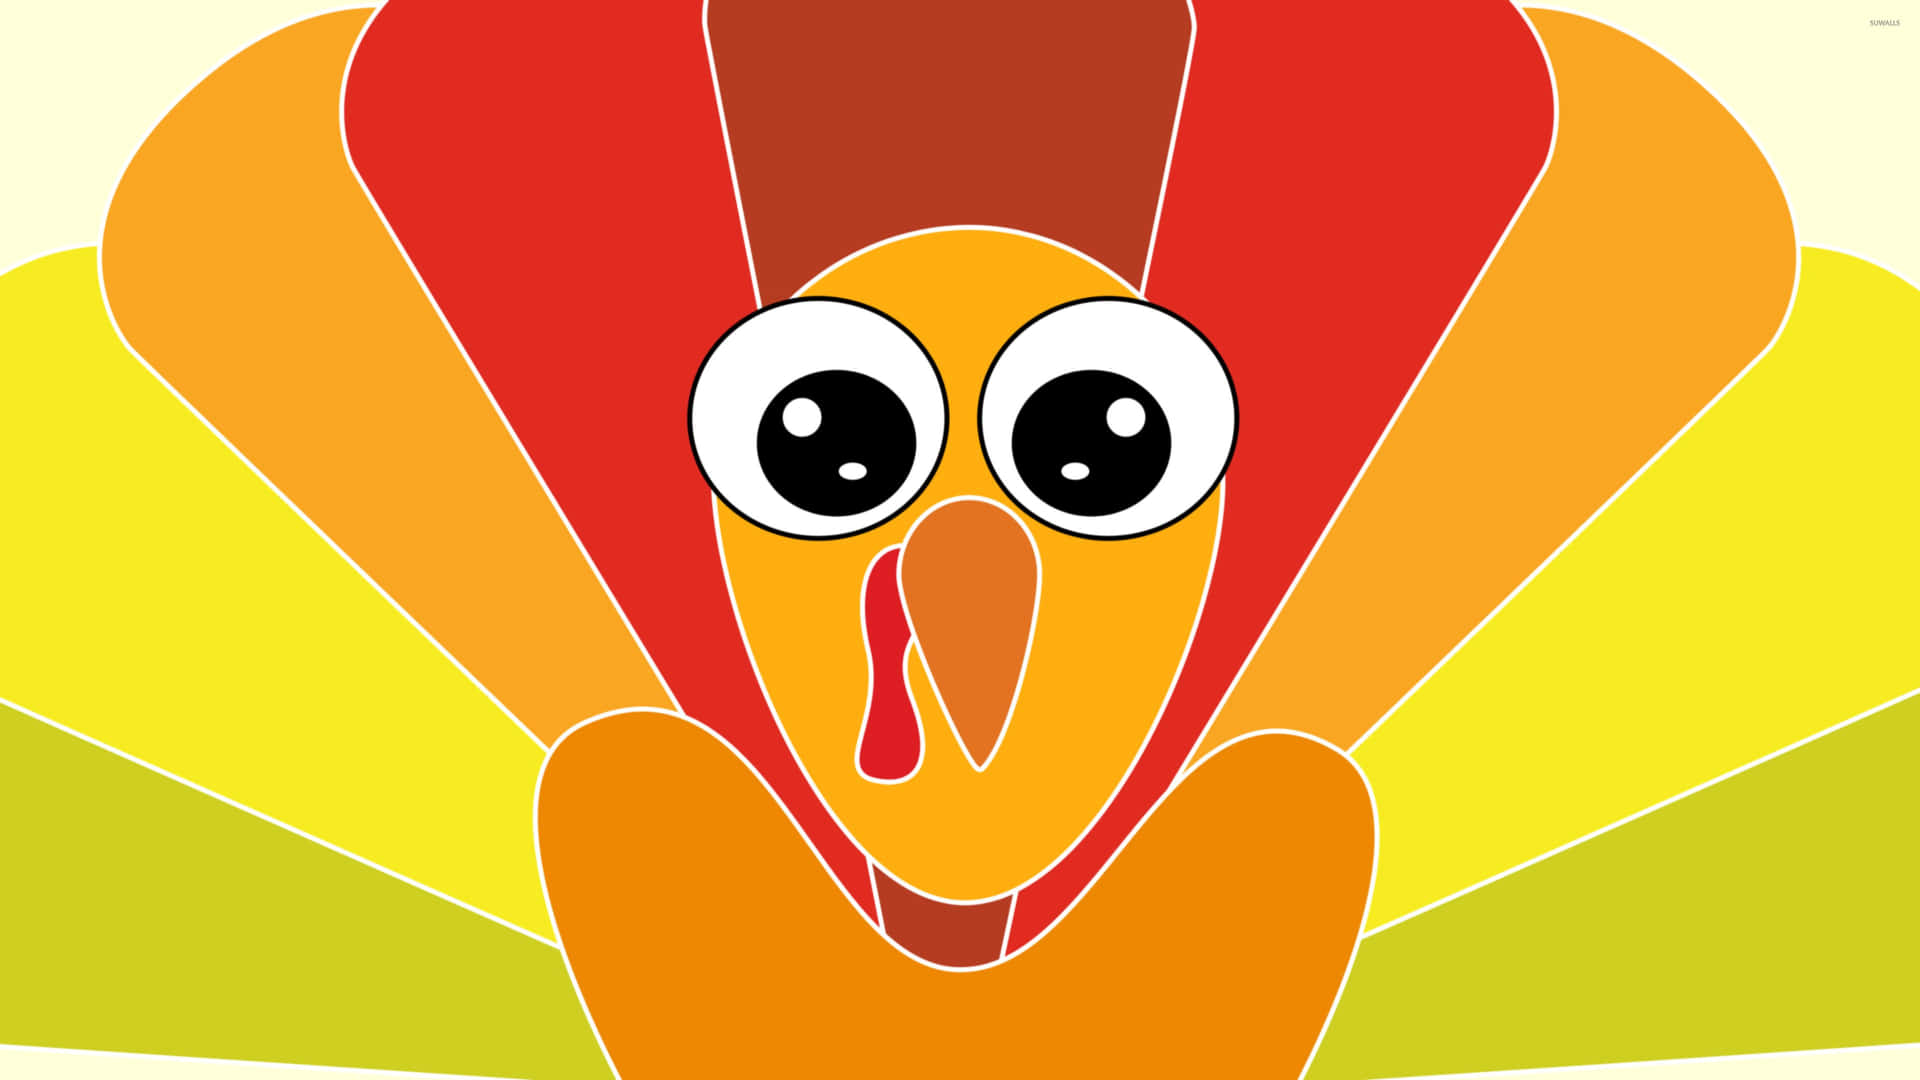 Celebrating with family and friends is the best Thanksgiving! Wallpaper